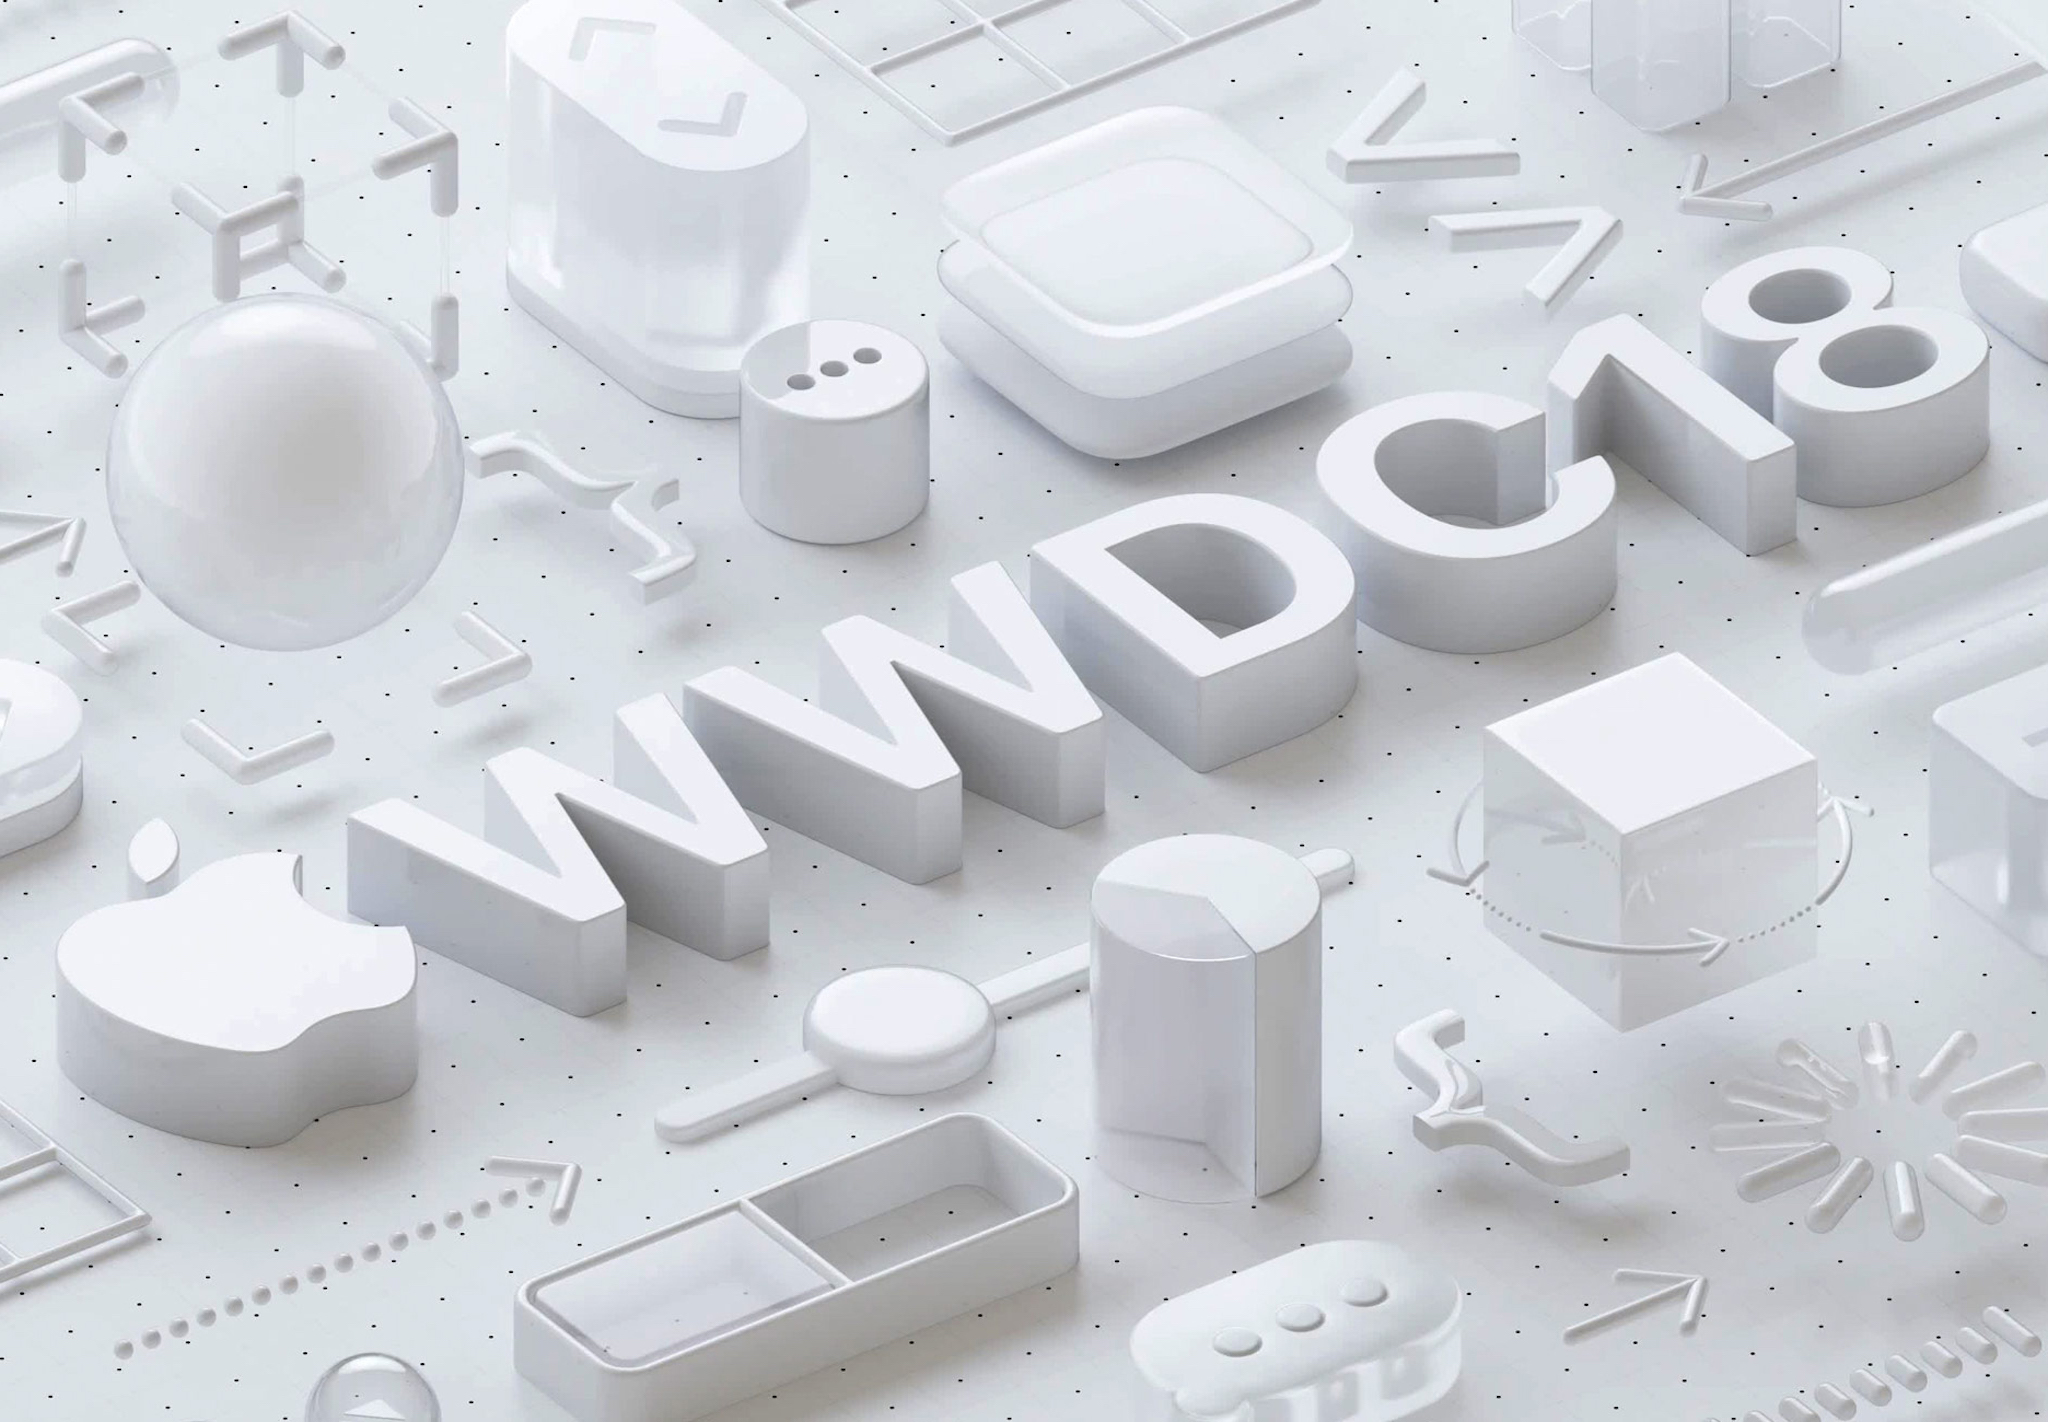 Apple's promotional imagery for WWDC 2018, consisting of lots of three-dimensional, all-white shapes rising from a flat surface.